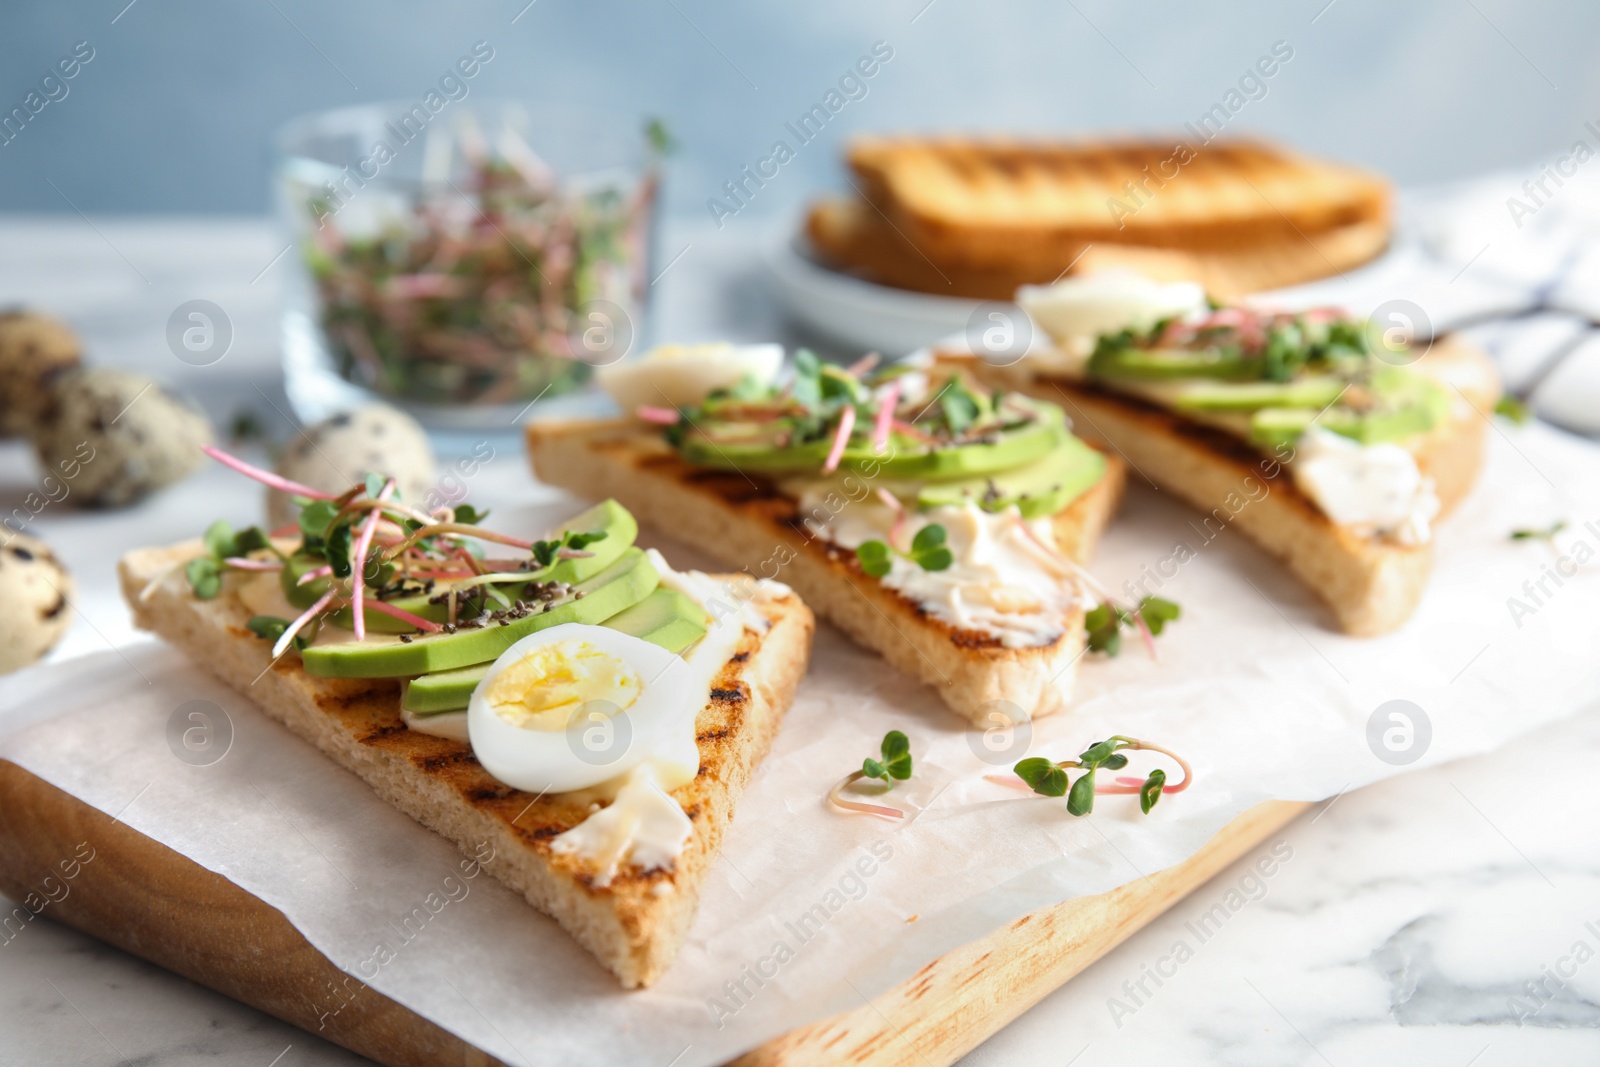 Photo of Tasty toasts with avocado, quail egg and chia seeds served on board